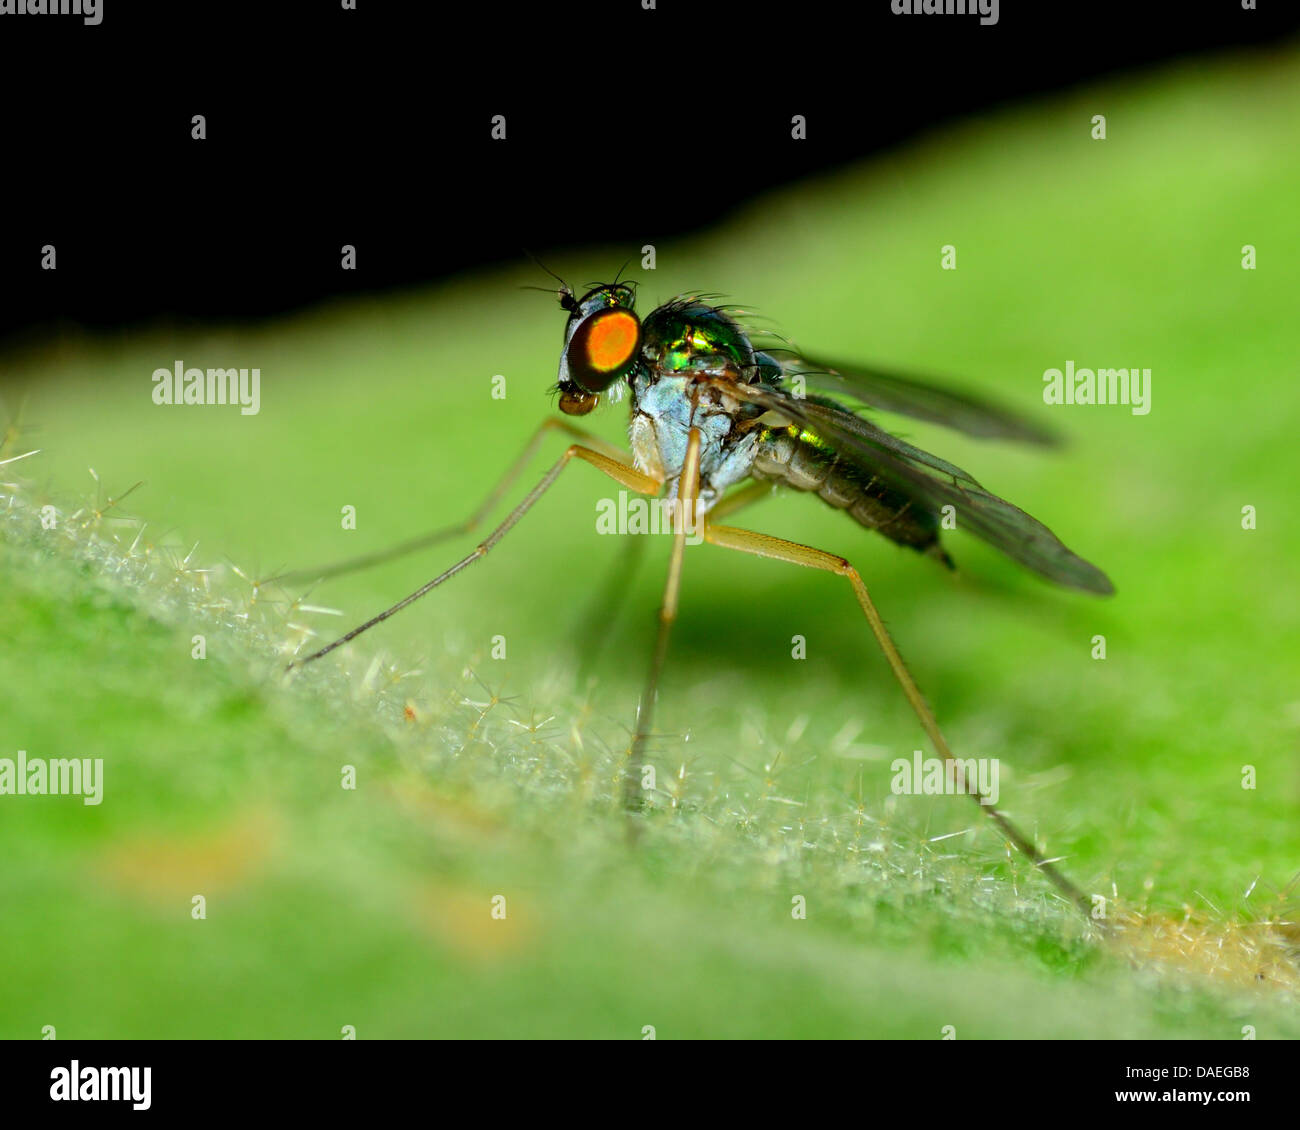 Green Long Legged Fly perched on a plant leaf. Stock Photo